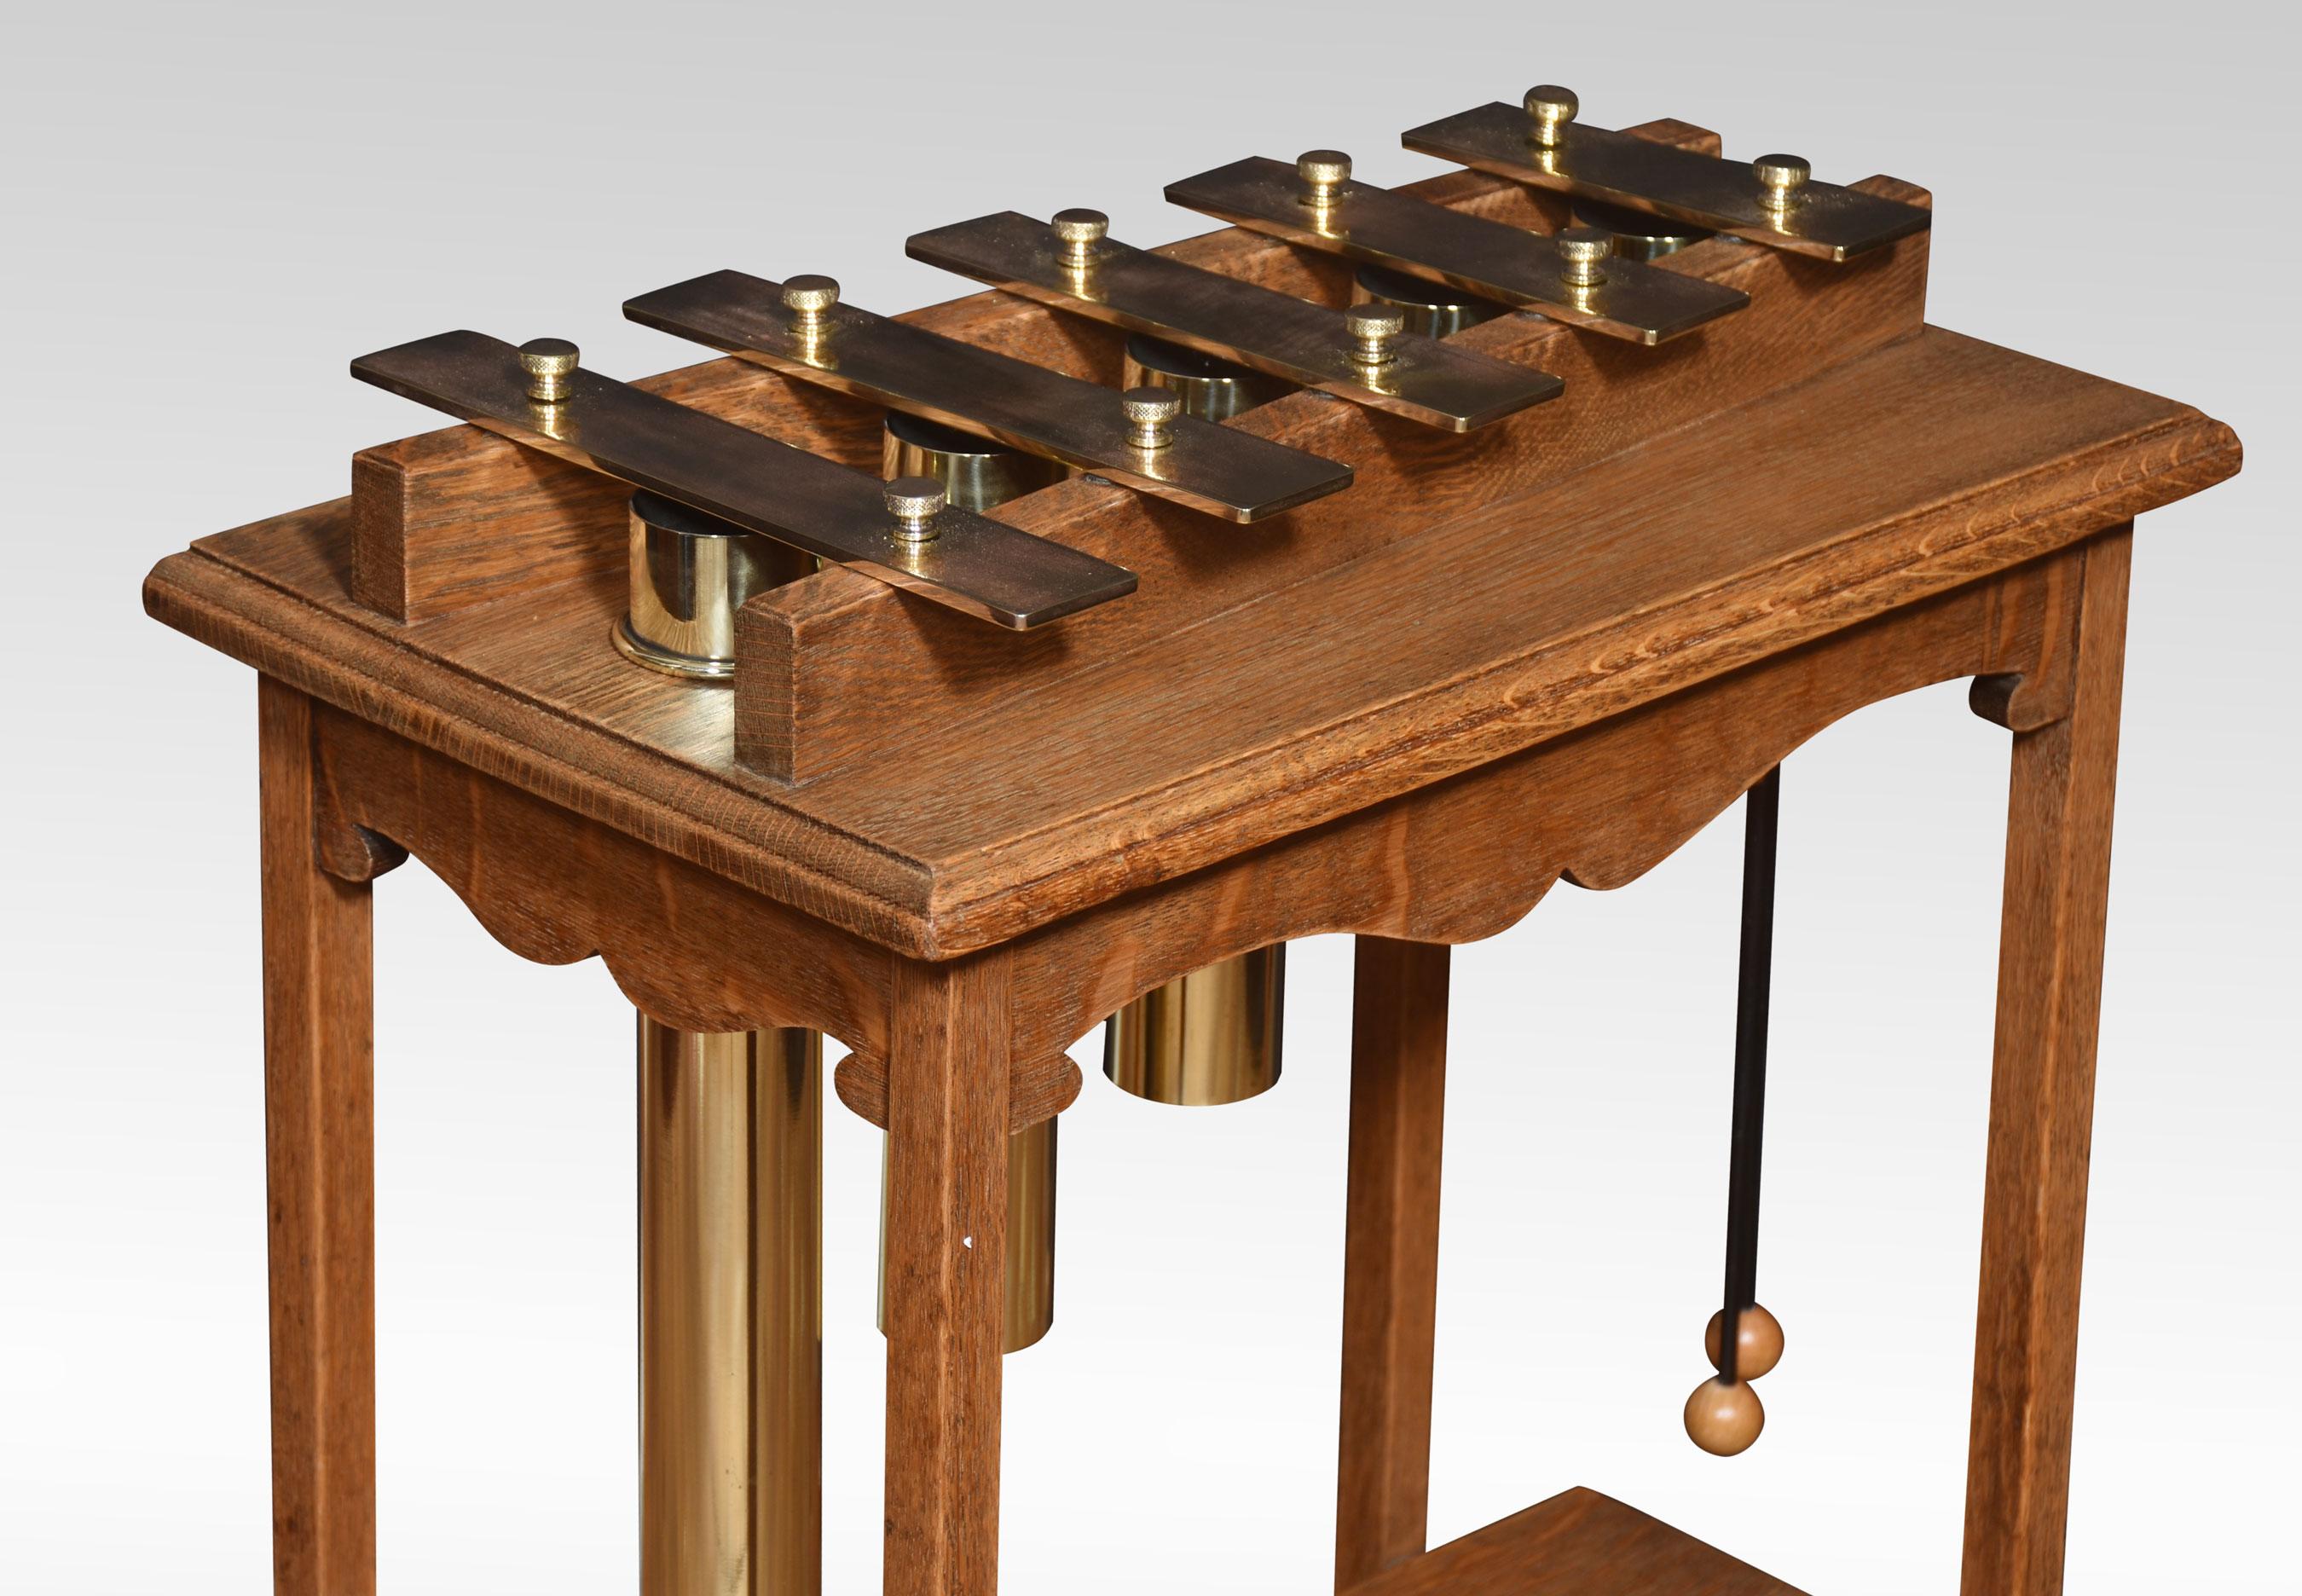 Oak cased glockenspiel, the solid oak frame supporting five brass keys with tubular brass cylinders below. All raised up on four splayed legs united by undertier.
Dimensions
Height 30 Inches
Width 20.5 Inches
Depth 13.5 Inches